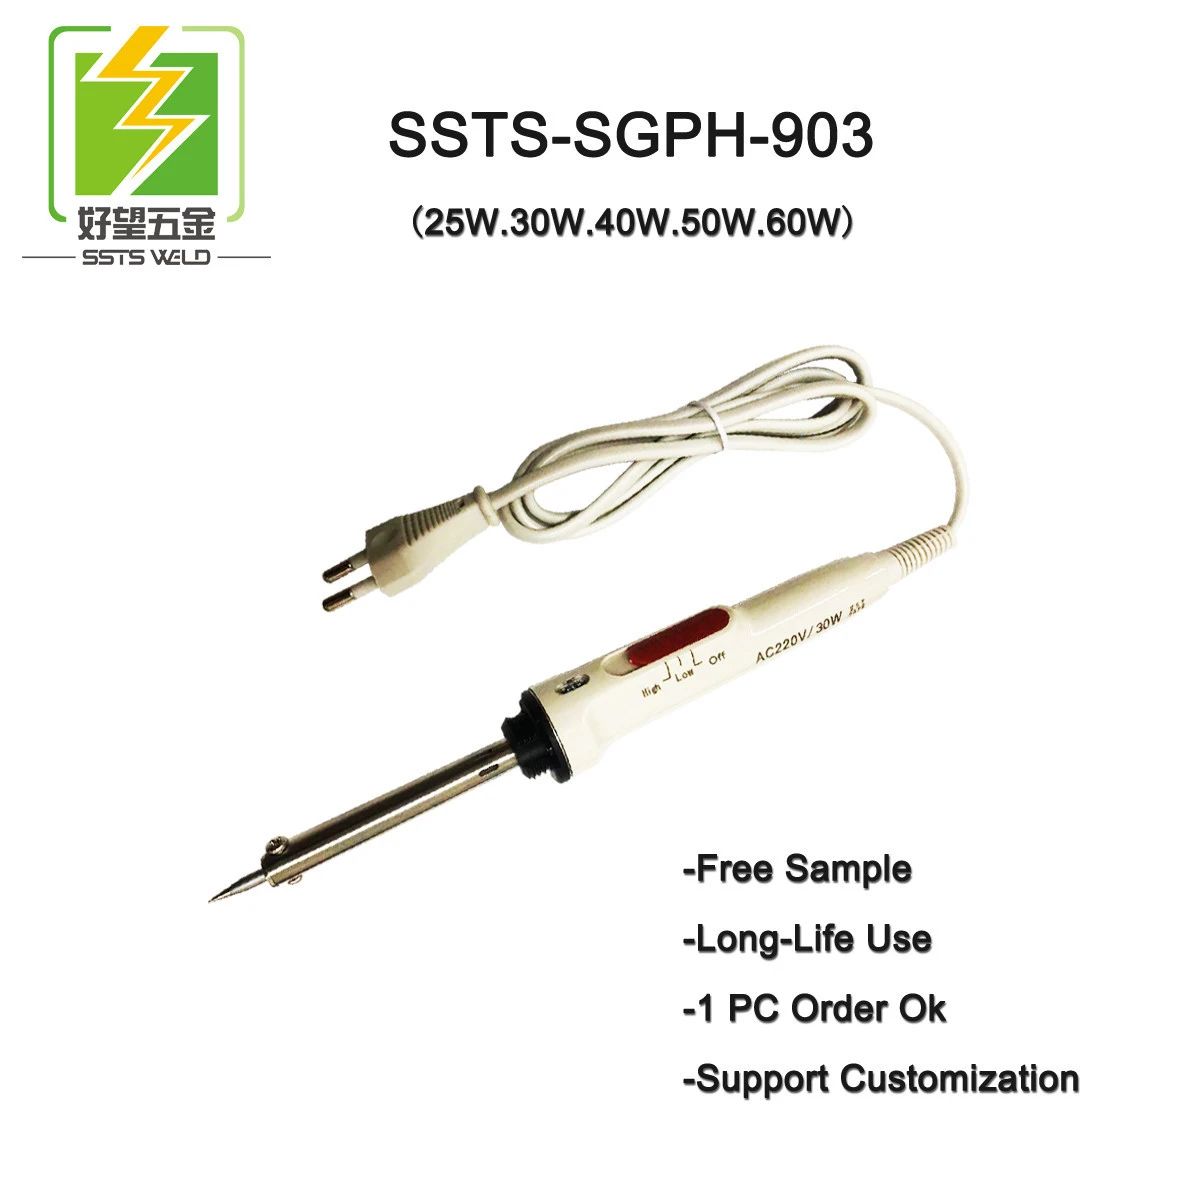 SSTS-SGPH-903 high quality china 25W 30W 40W 50W 60W plastic handle soldering irons